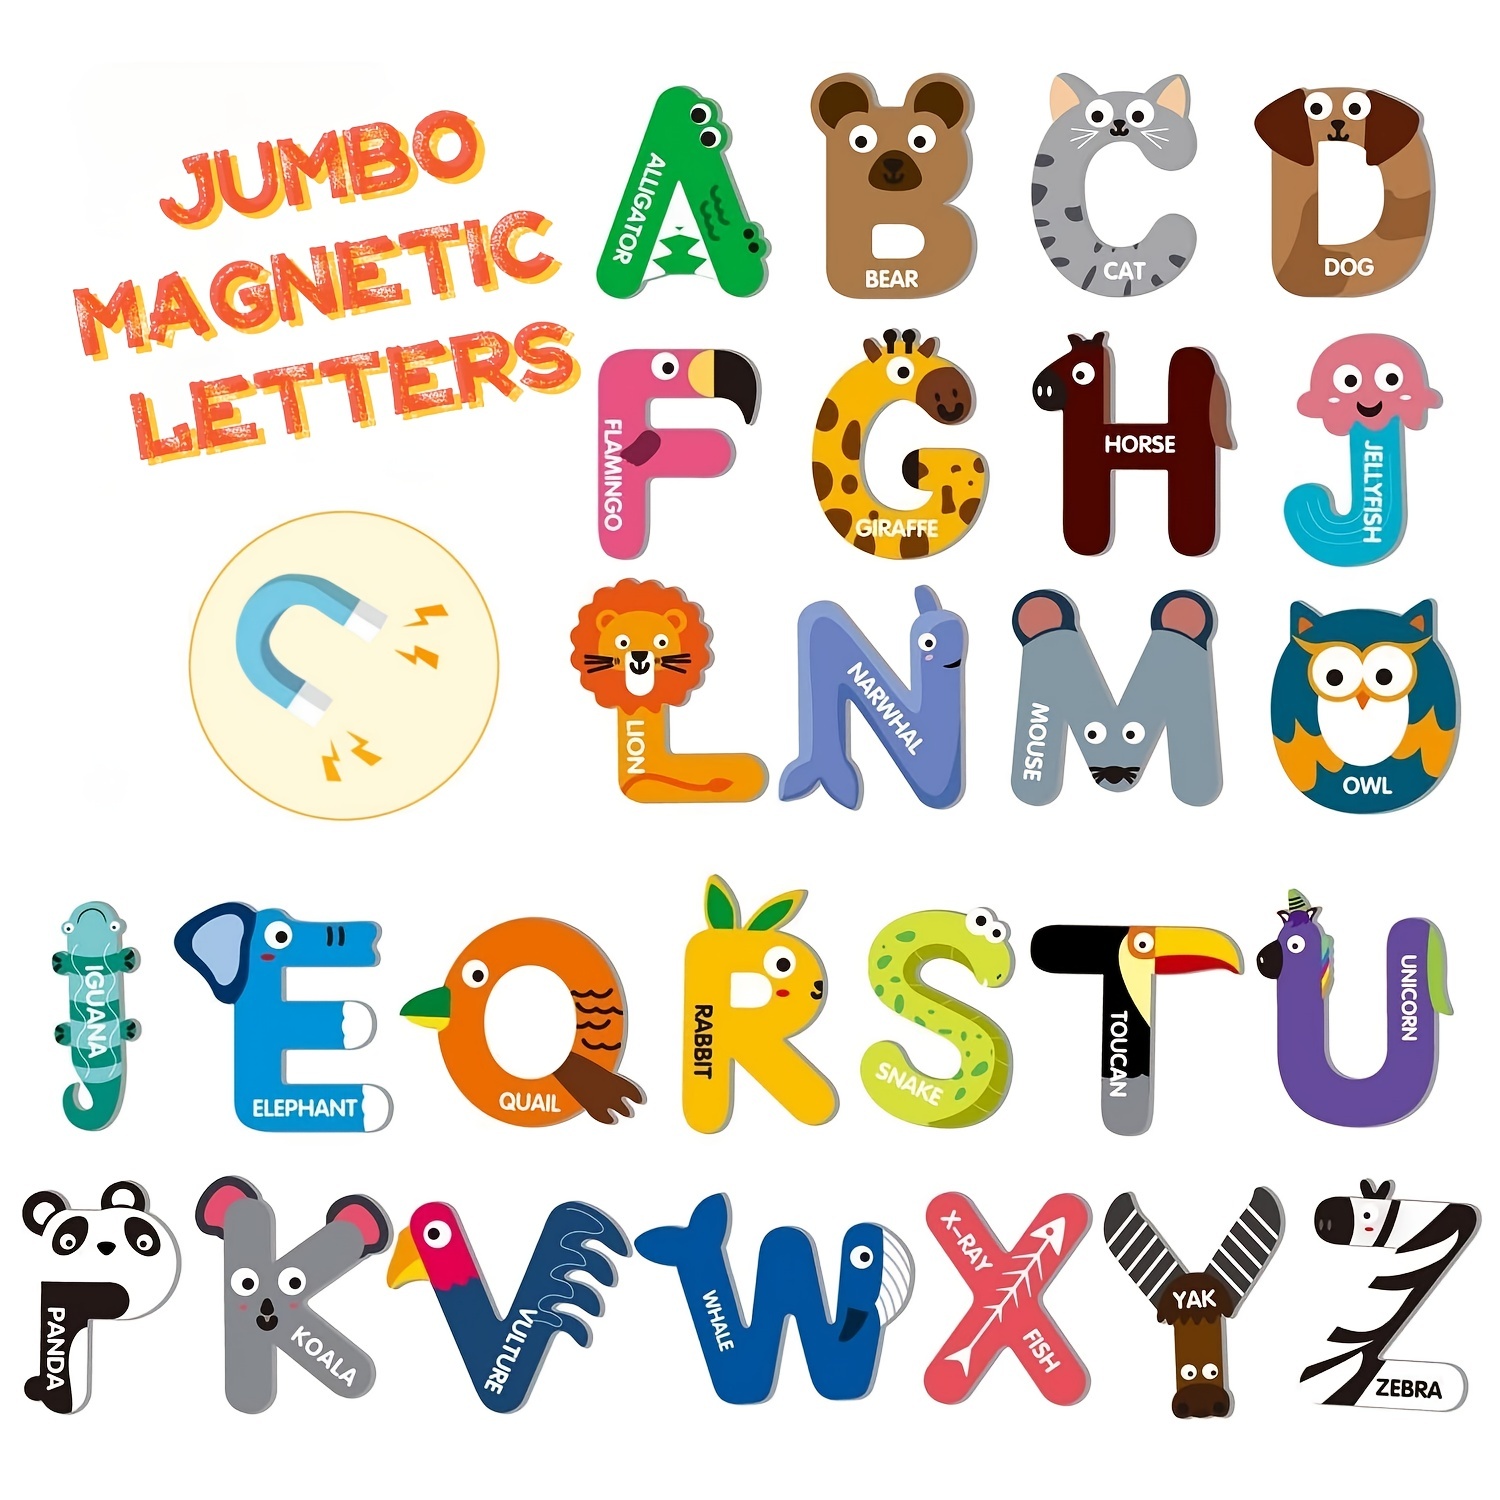 2-Inch Wooden Alphabet Letters for Arts and Crafts, 4 Sets Uppercase ABCs  with Sorting Tray, Sign Letters for Adults, Natural Color (104 Pieces)